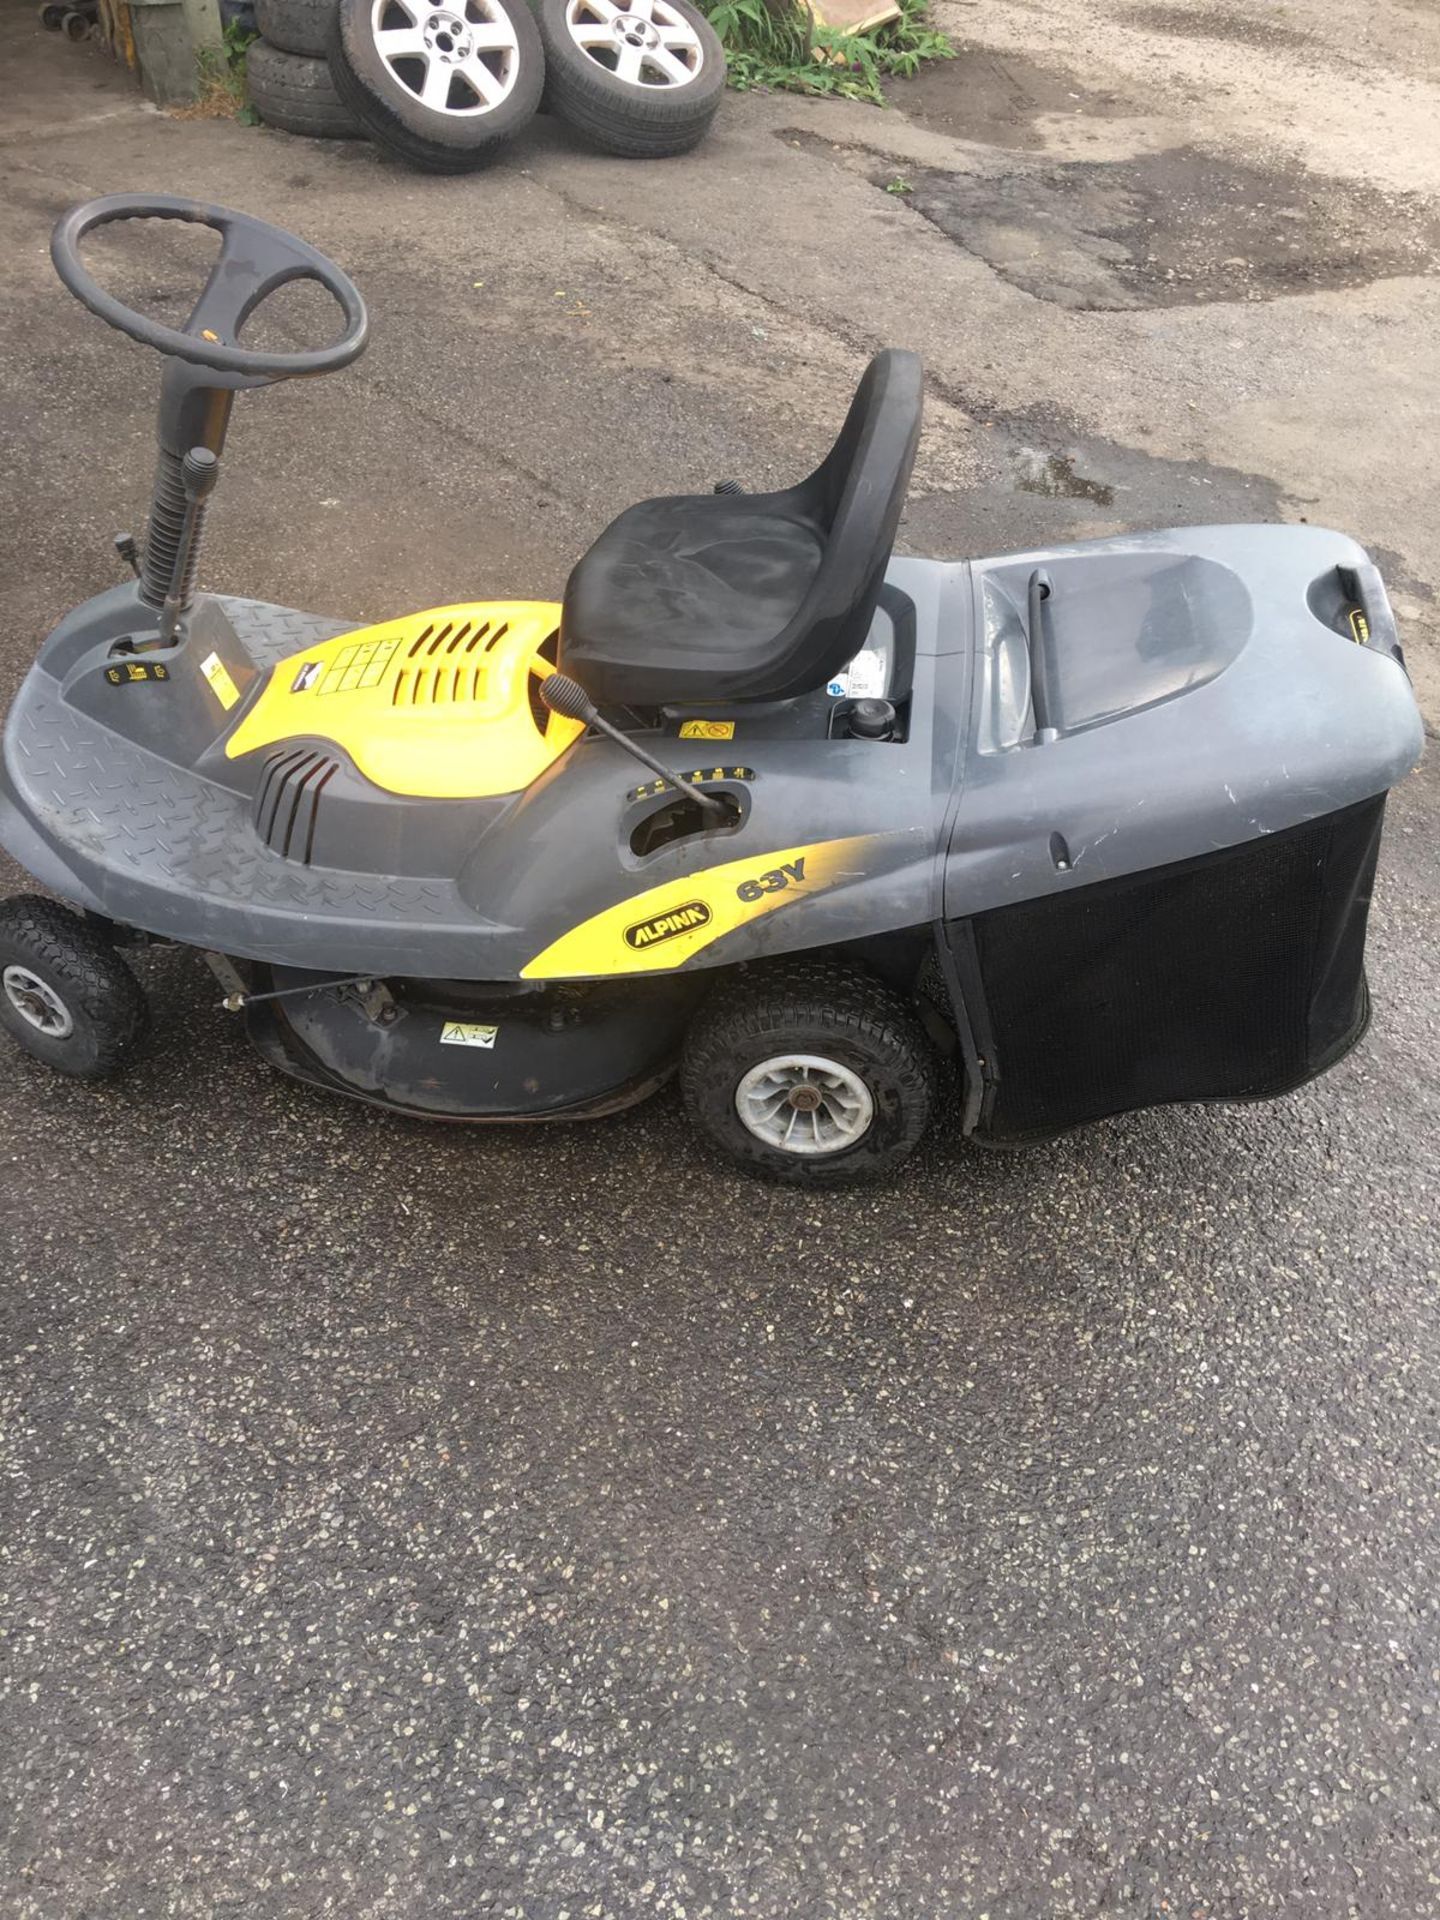 ALPINK ONE 63Y RIDE ON LAWN MOWER, ENGINE STARTS, BLADE RUNS BUT NO DRIVE *NO VAT* - Image 4 of 7